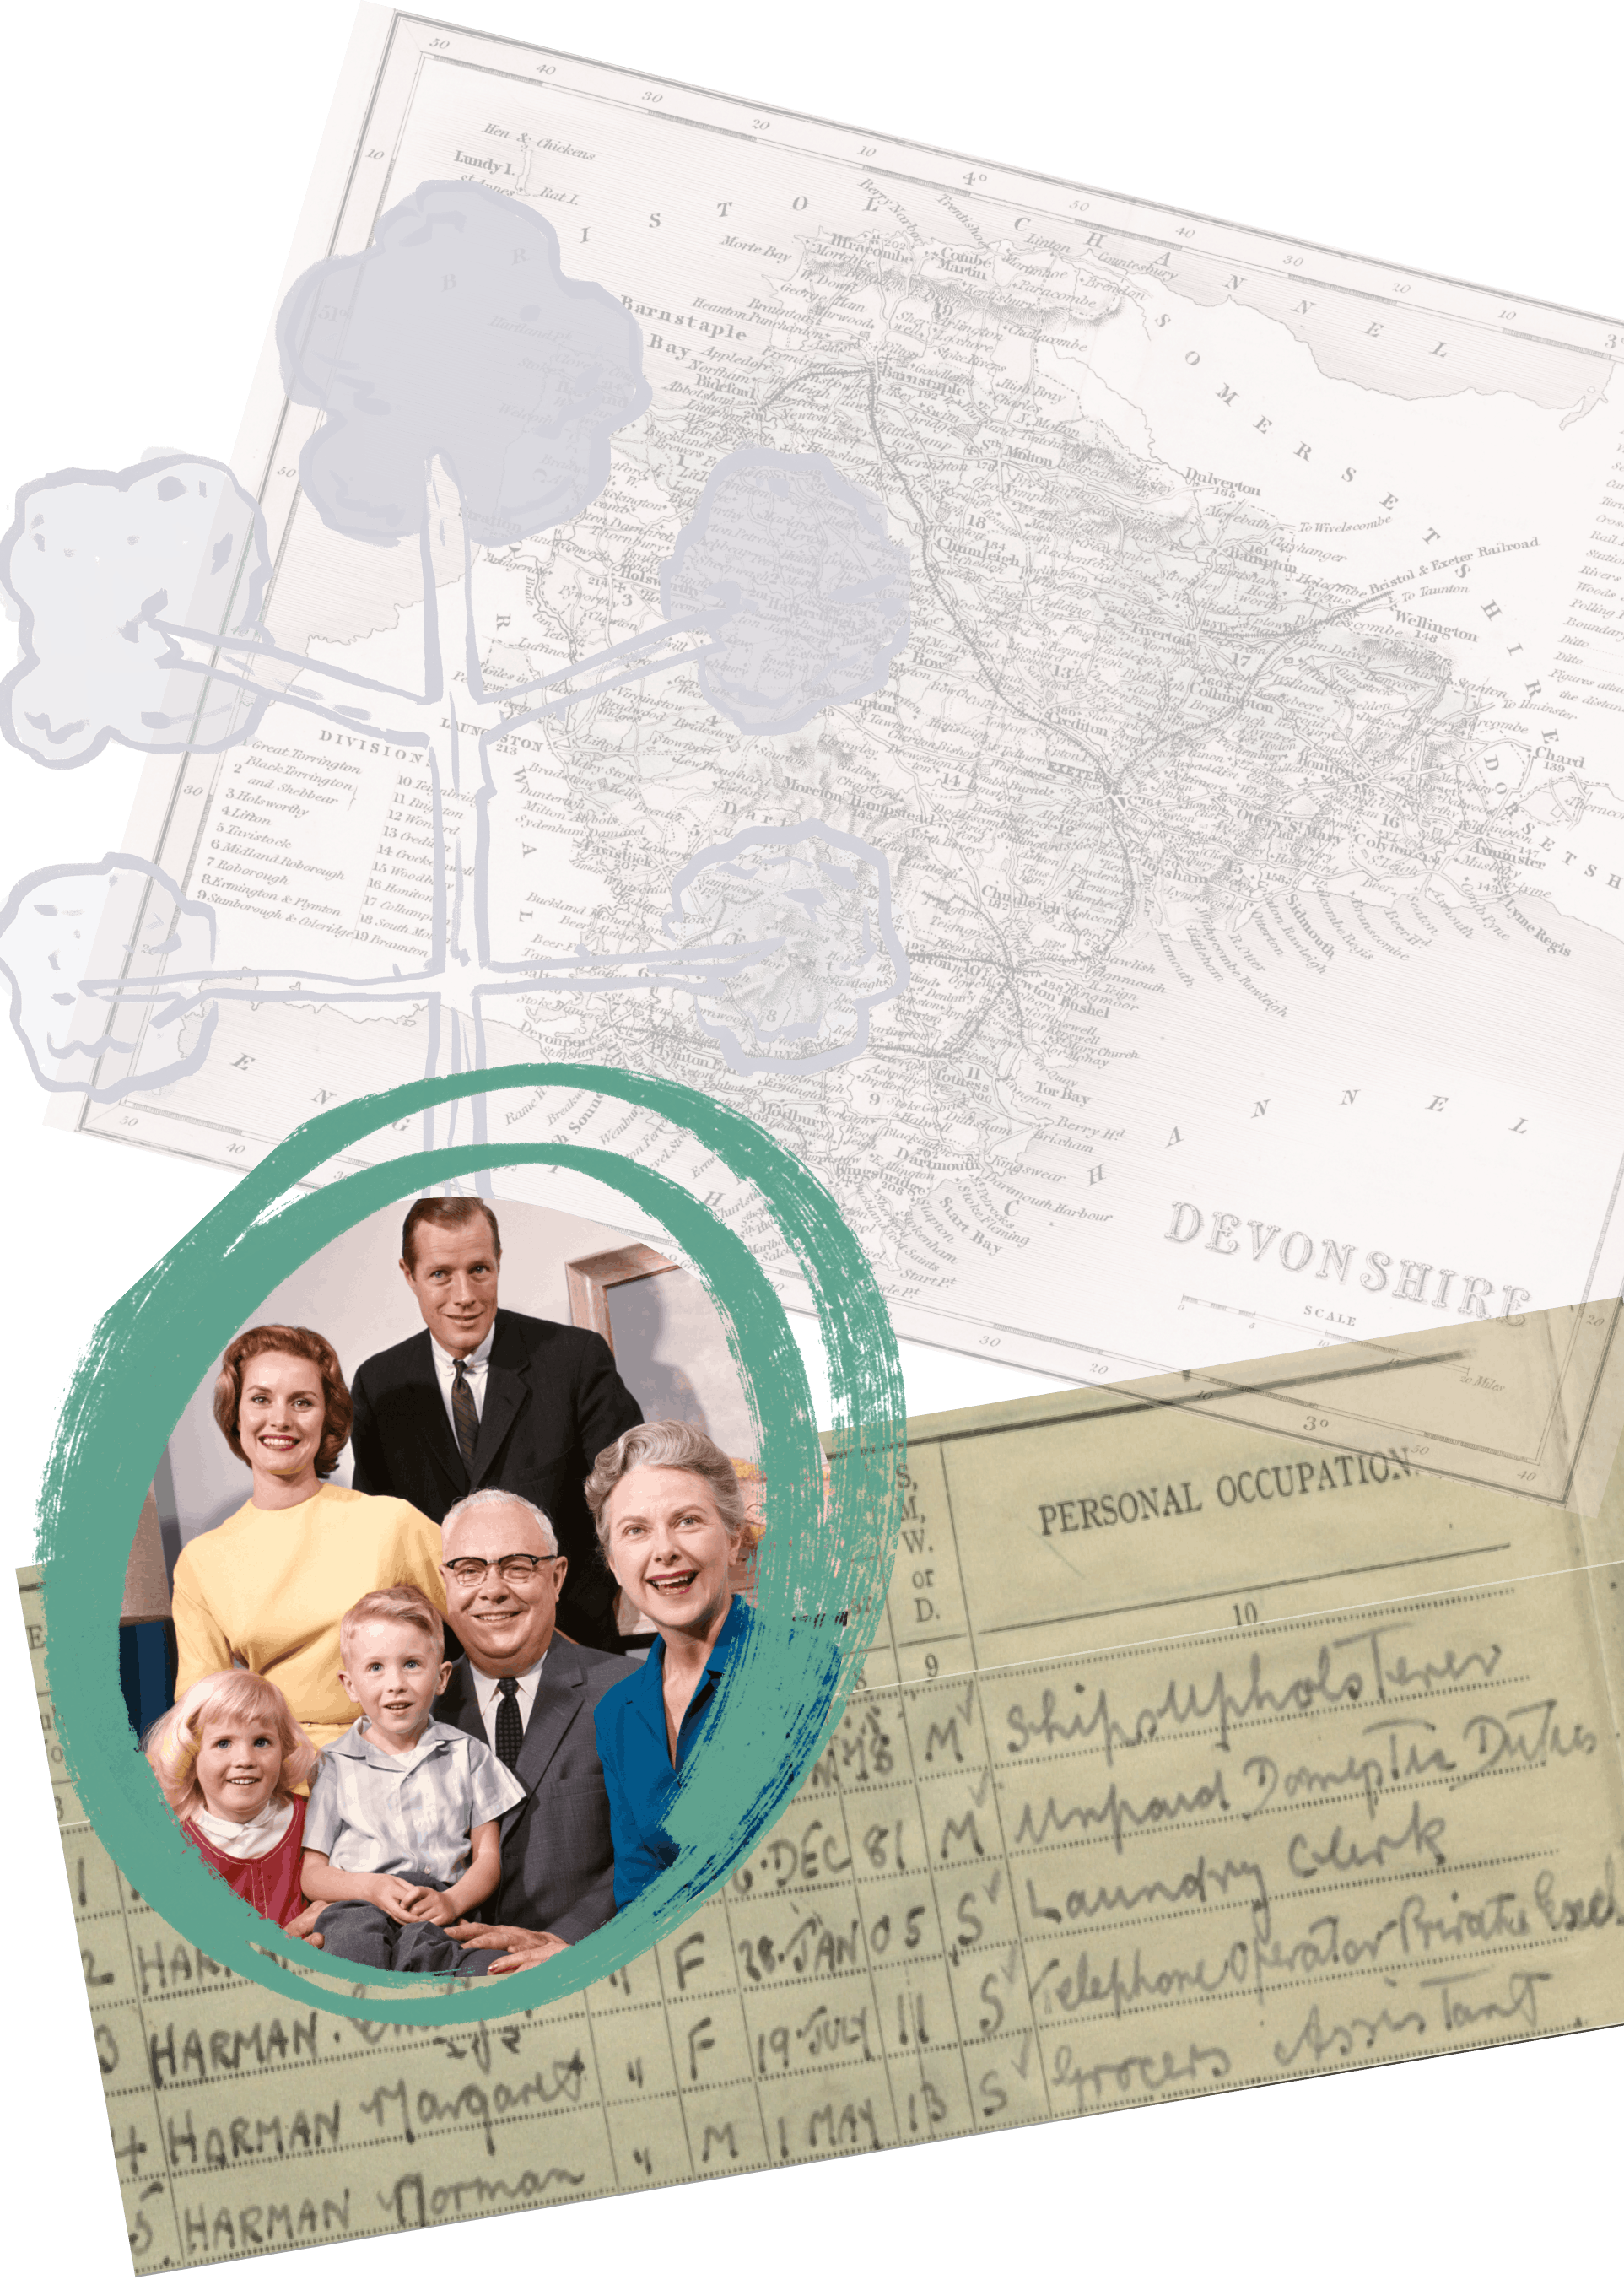 research my family history for free uk